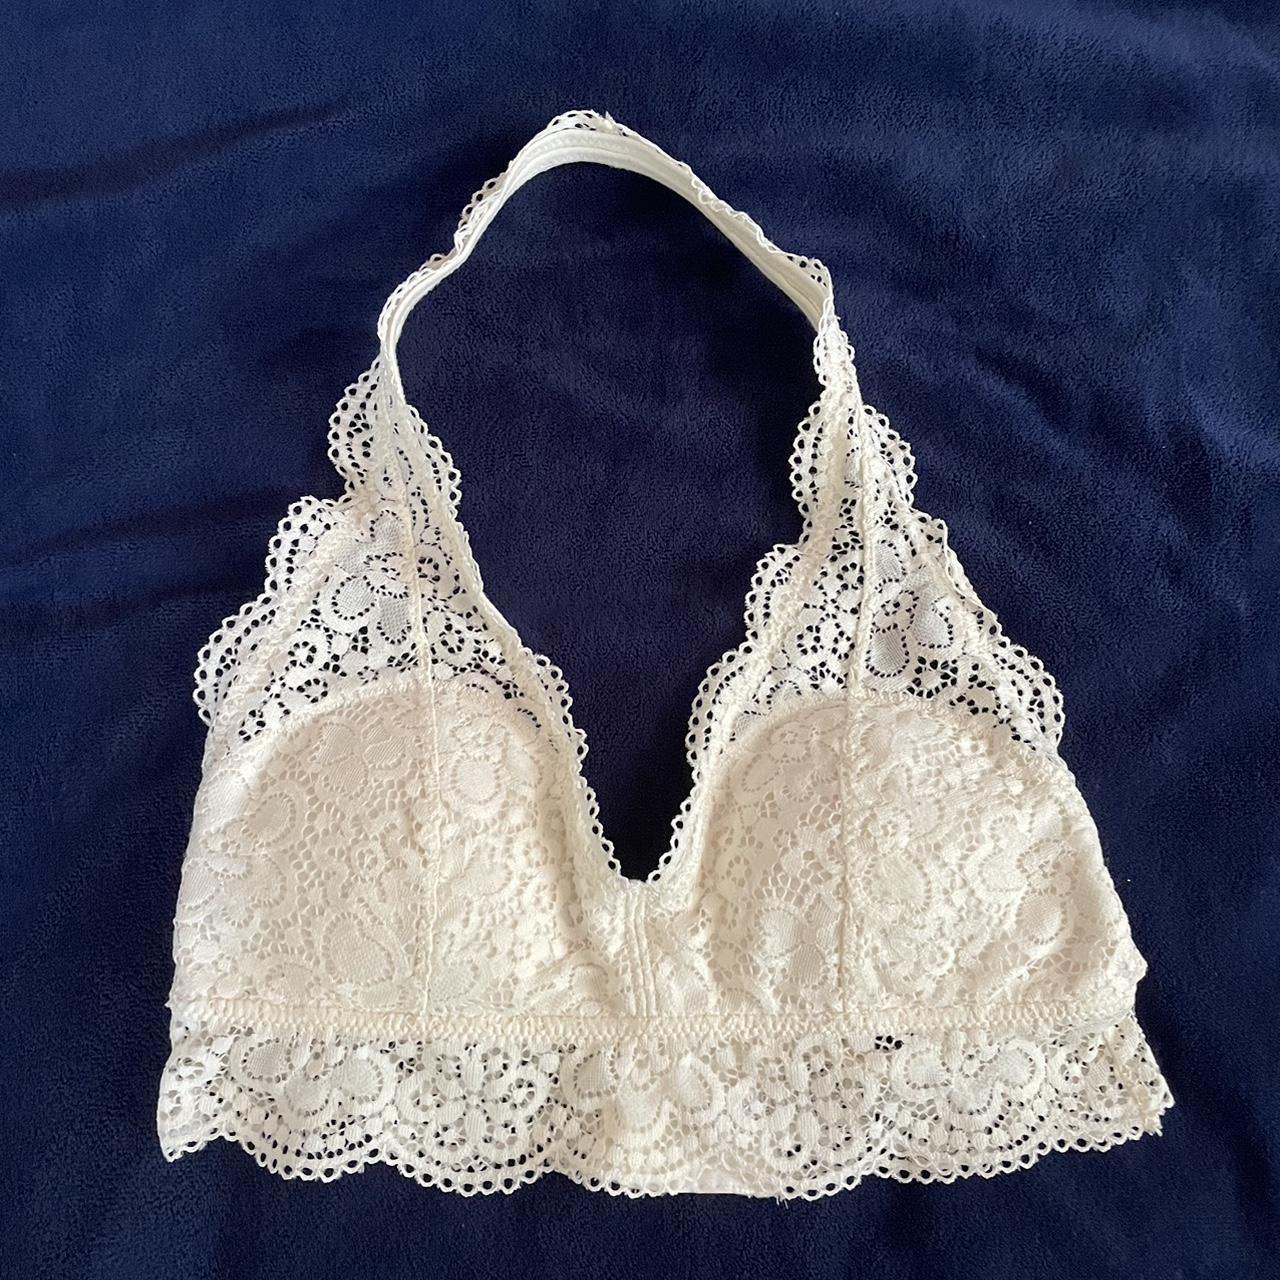 Aerie lace bralette in cream! - work once, great - Depop